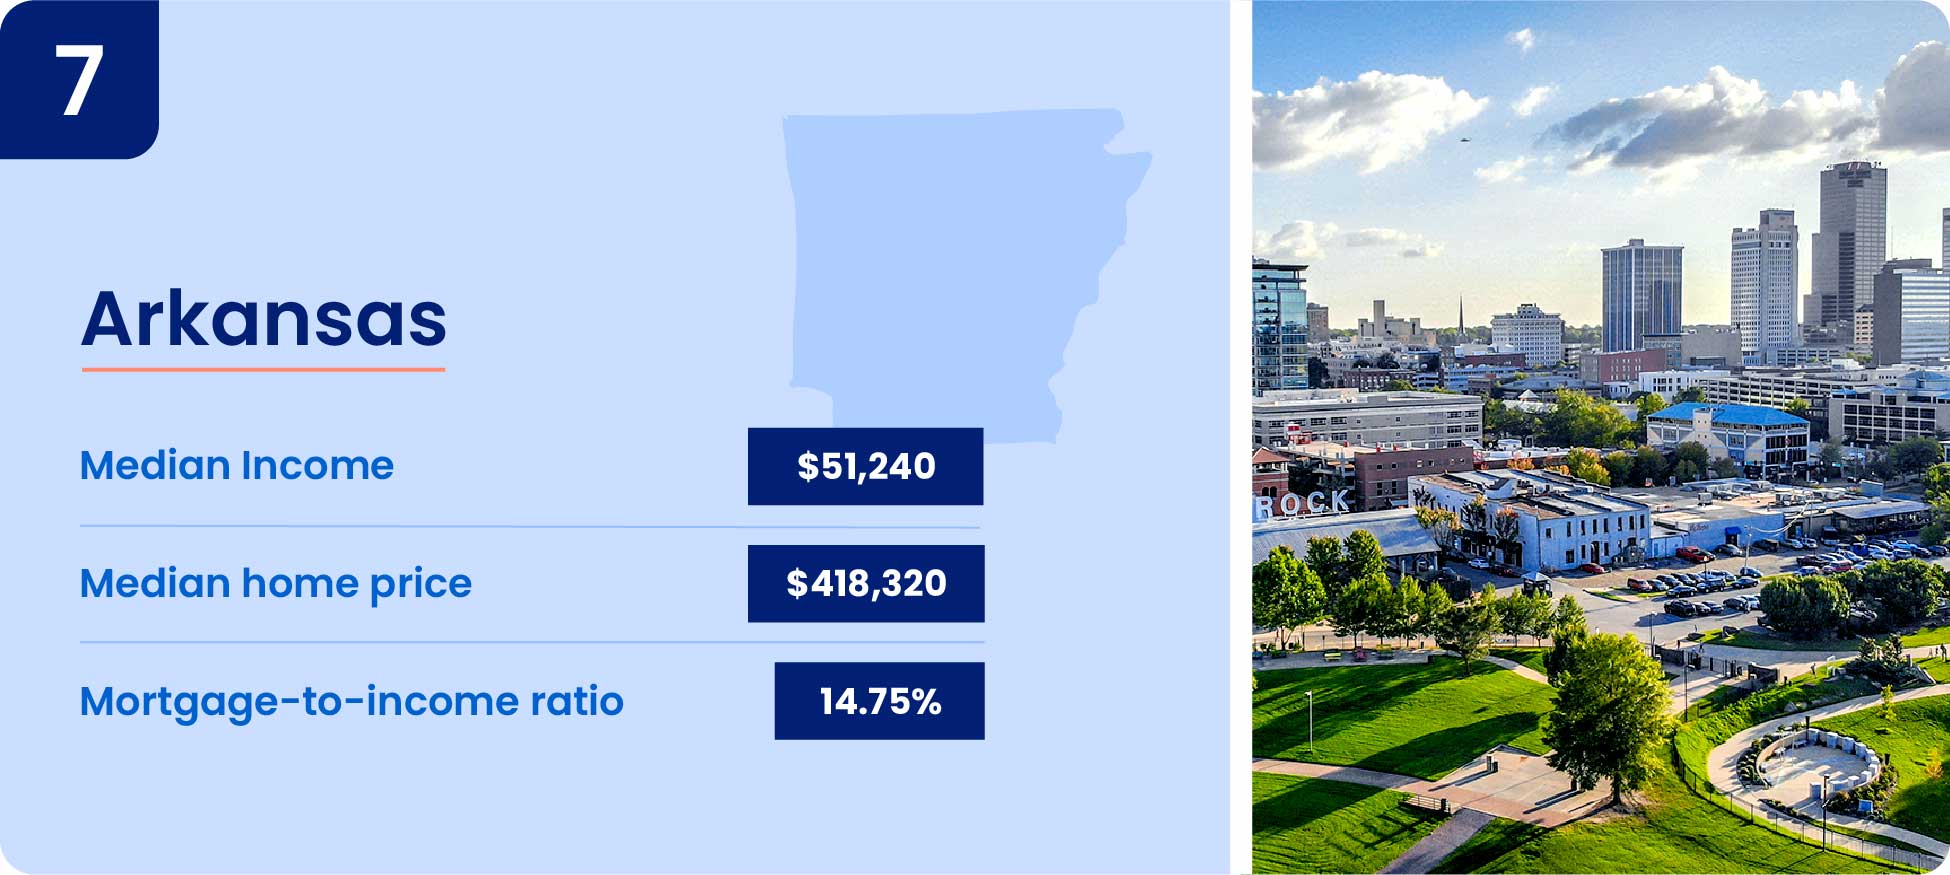 Image shows why one of the cheapest states to buy a house is Arkansas.